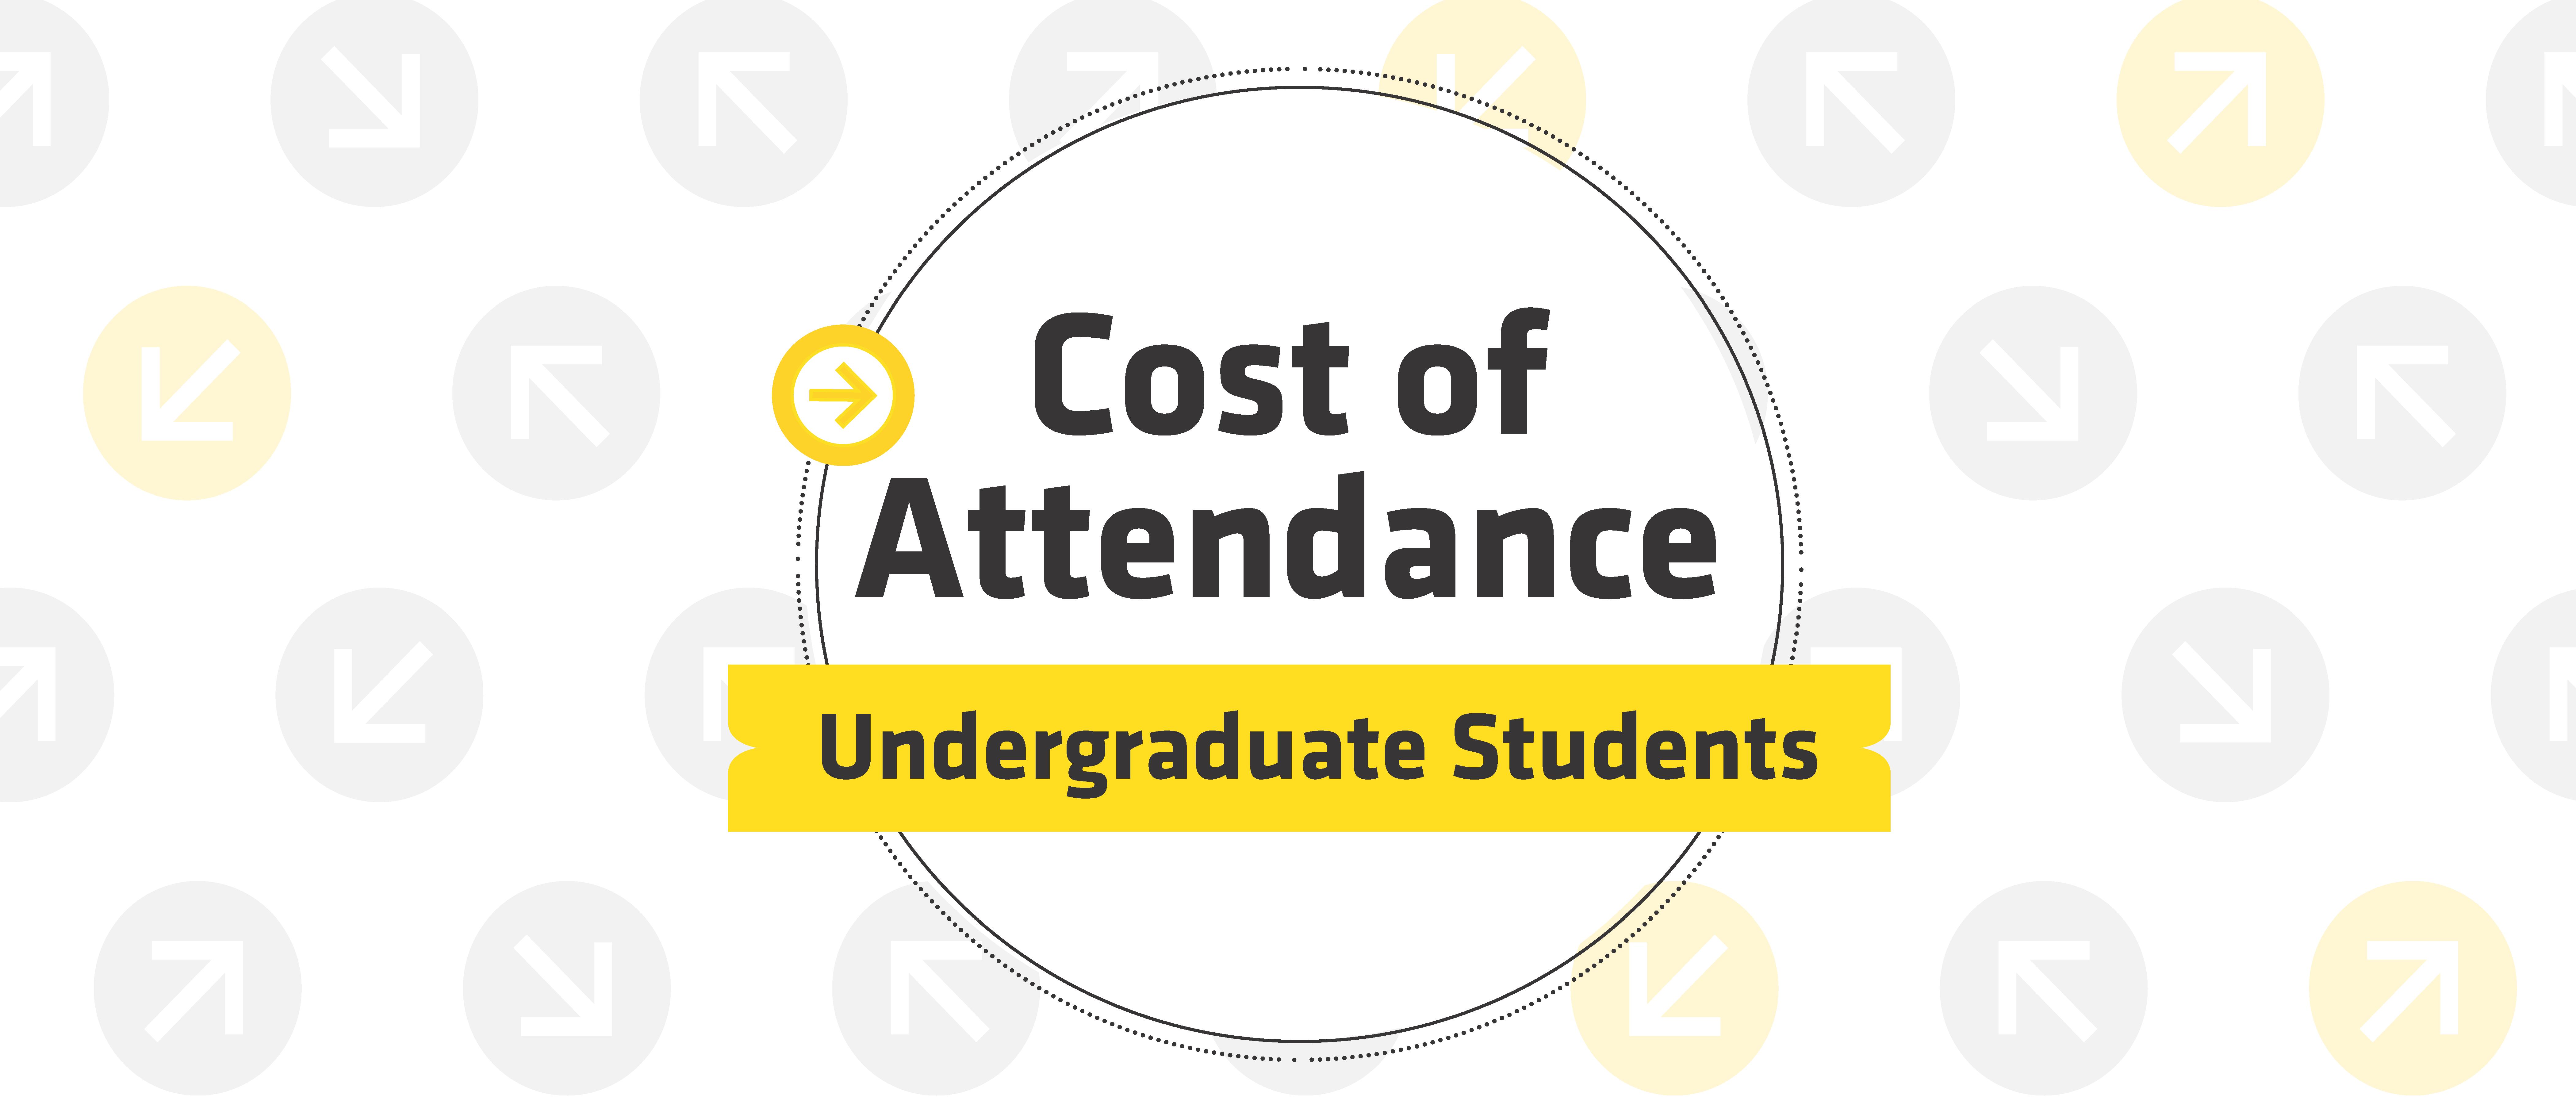 Text - Cost of Attendance for Undergraduate Students; circles and arrows in background